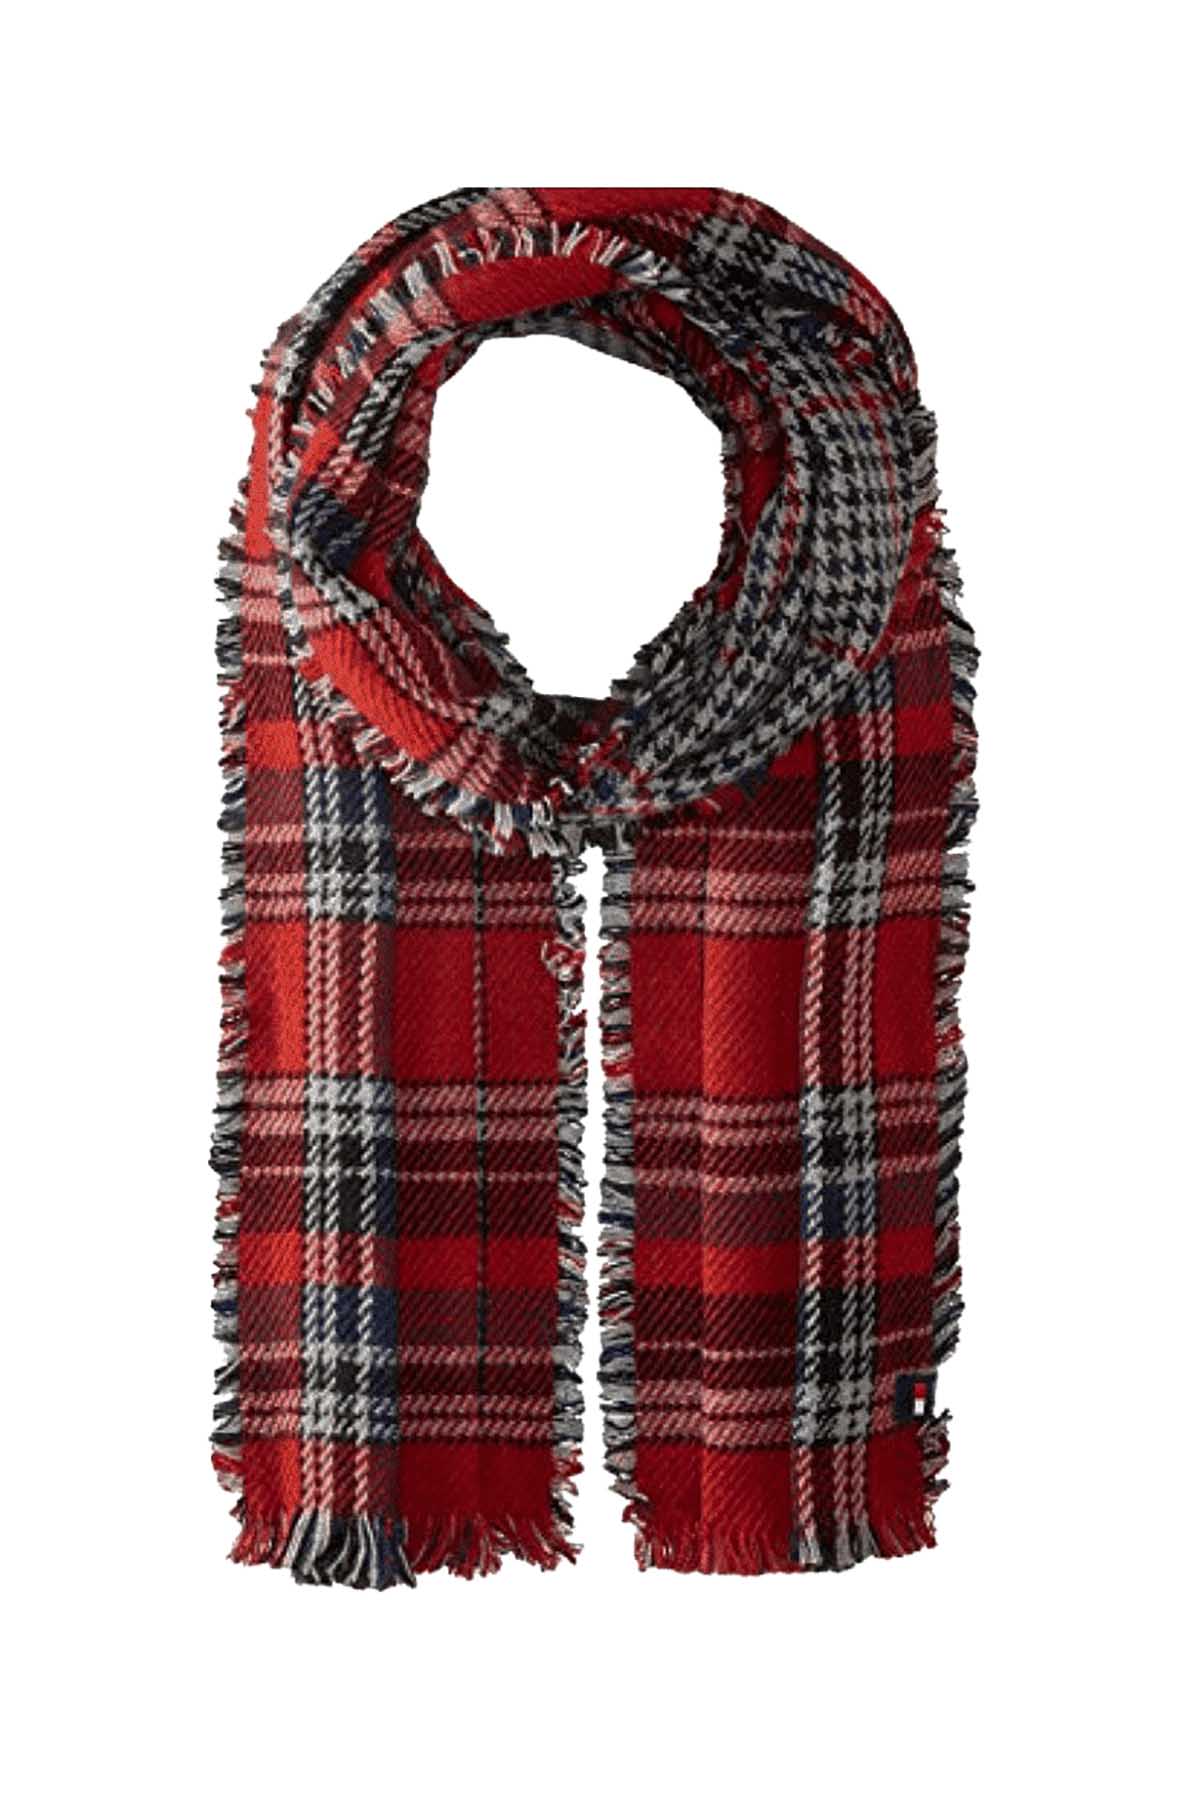 Tommy Hilfiger Red/Multi Houndstooth/Tartan Reversible Scarf